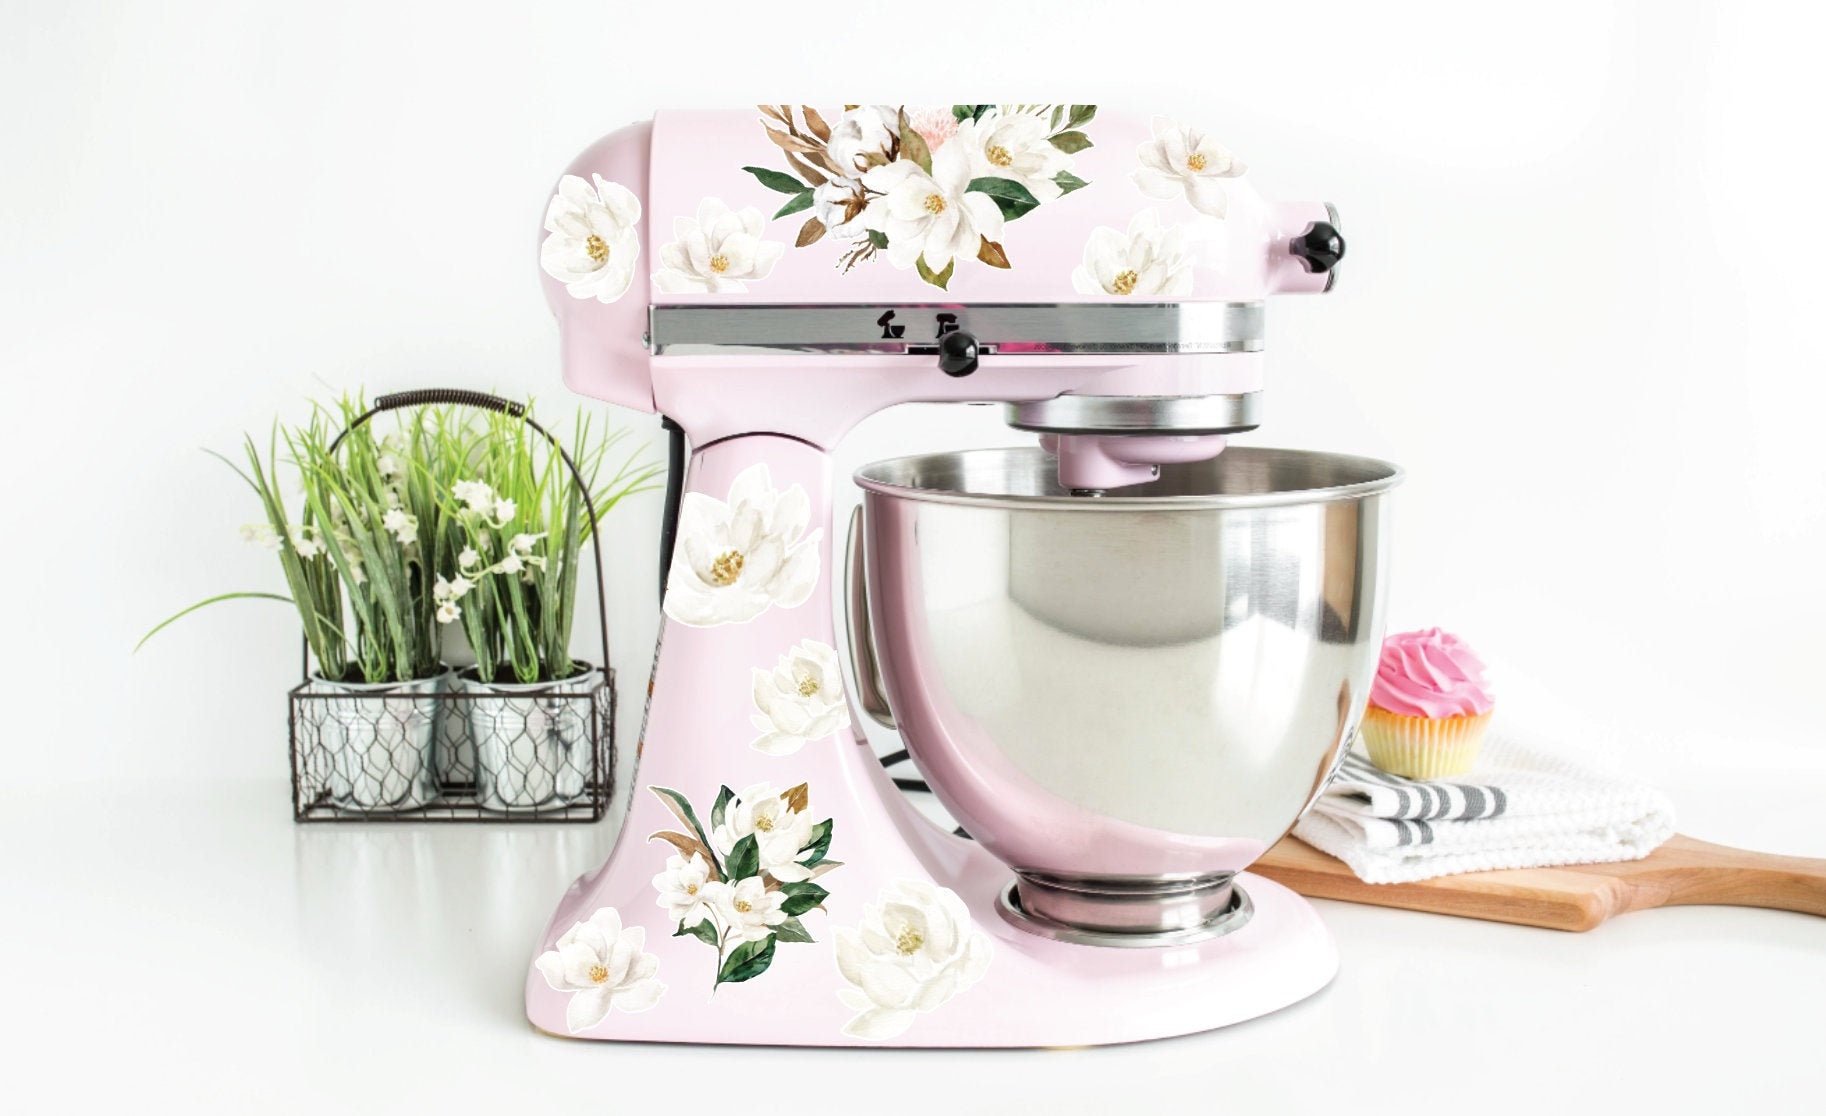 The New Blossom KitchenAid Stand Mixer Is Here